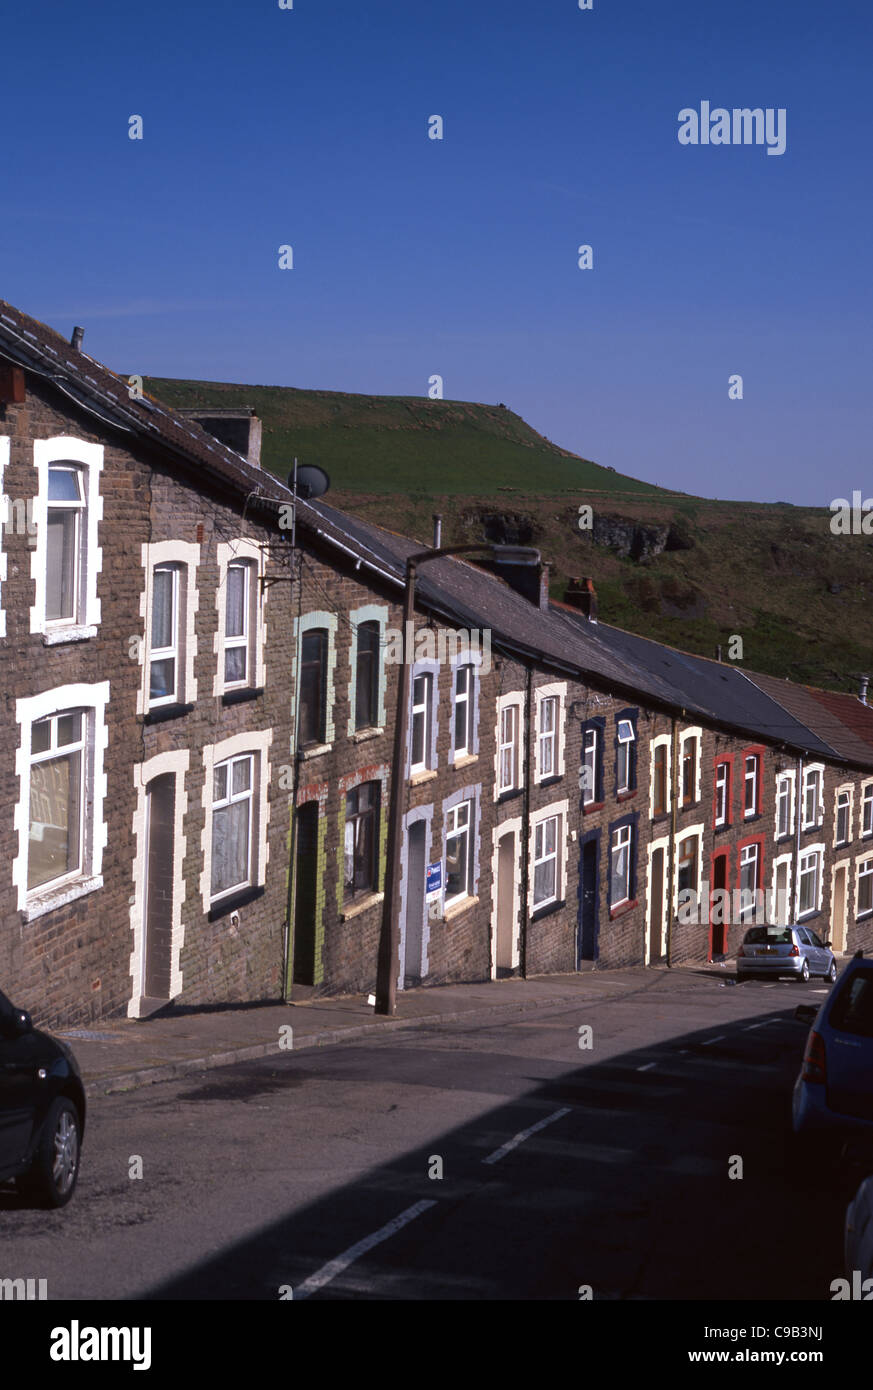 Steep row of typical Valleys terraced houses Tylorstown Rhondda Fach valley Rhondda Cynon Taff South Wales UK Stock Photo